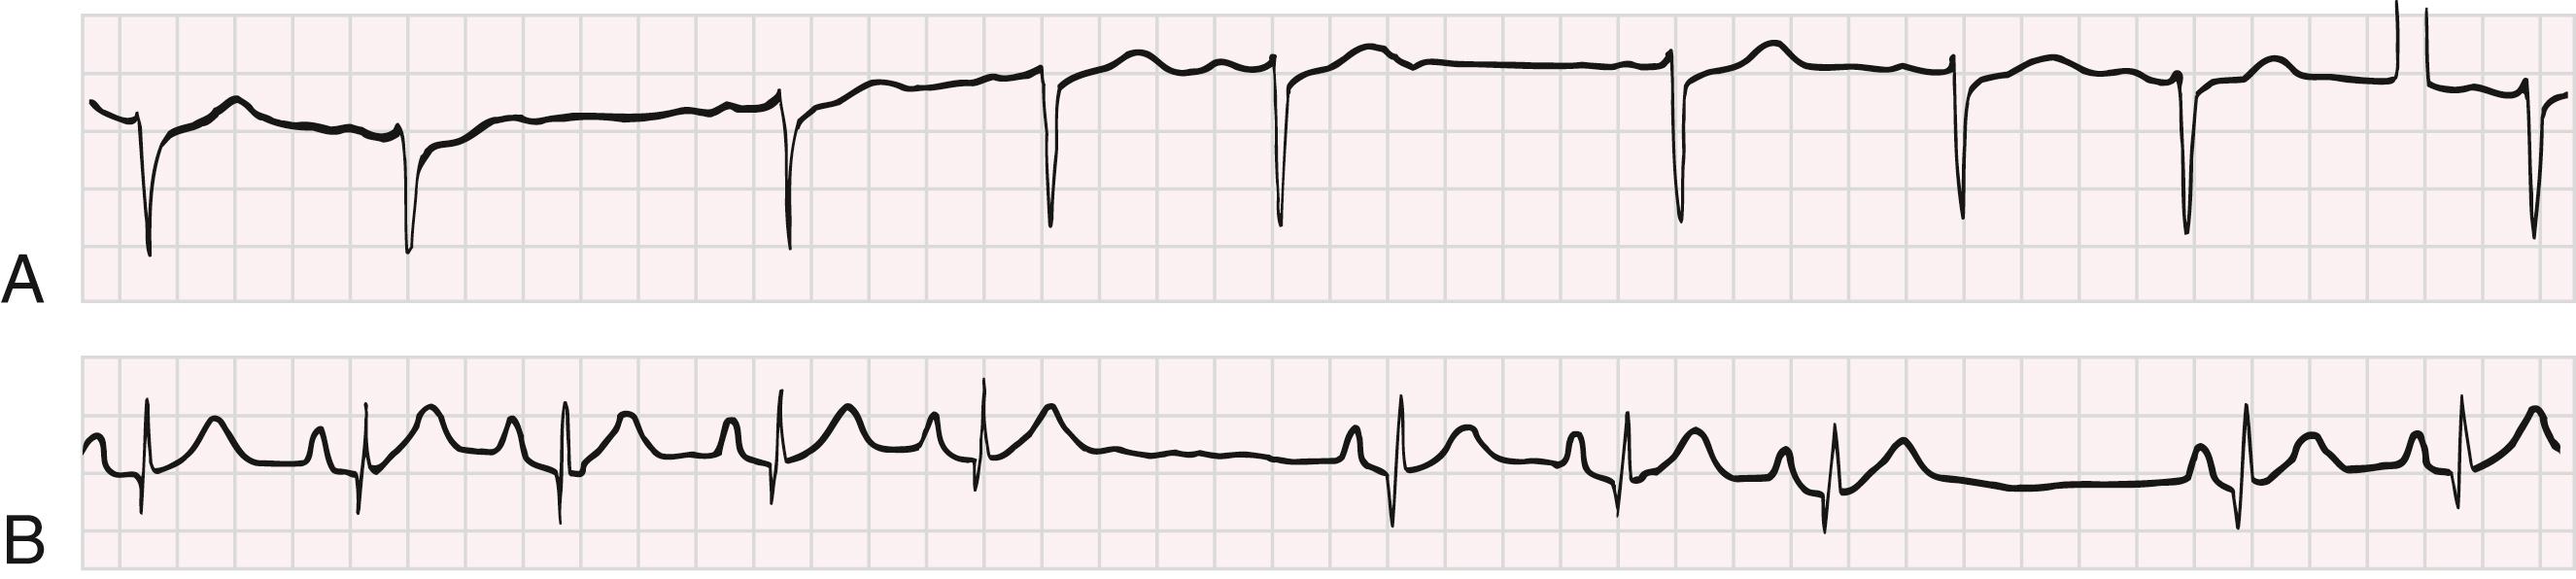 EFIGURE 68.2, Sinus nodal exit block. A, Type I sinoatrial (SA) nodal exit block has the following features. The P-P interval shortens from the first to the second cycle in each grouping, followed by a pause. The duration of the pause is less than twice the shortest cycle length, and the cycle after the pause exceeds the cycle before the pause. The PR interval is normal and constant. Lead V 1 is shown. B, The P-P interval varies slightly because of sinus arrhythmia. The two pauses in sinus nodal activity equal twice the basic P-P interval and are consistent with type II SA nodal exit block. The PR interval is normal and constant. Lead III recording is shown.